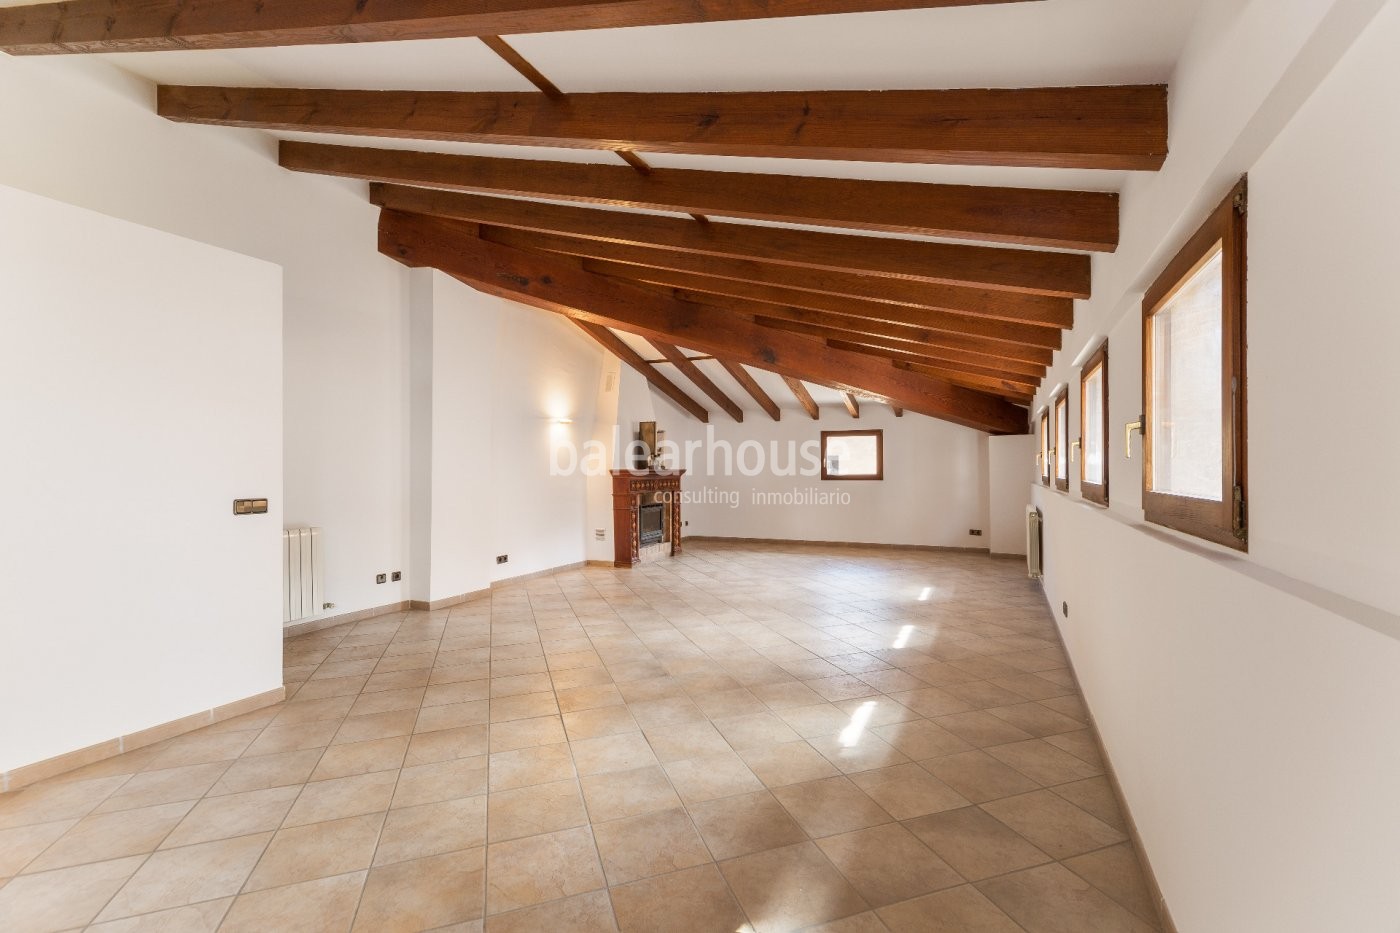 Excellent and luminous penthouse in a stately building in the beautiful old town of Palma.